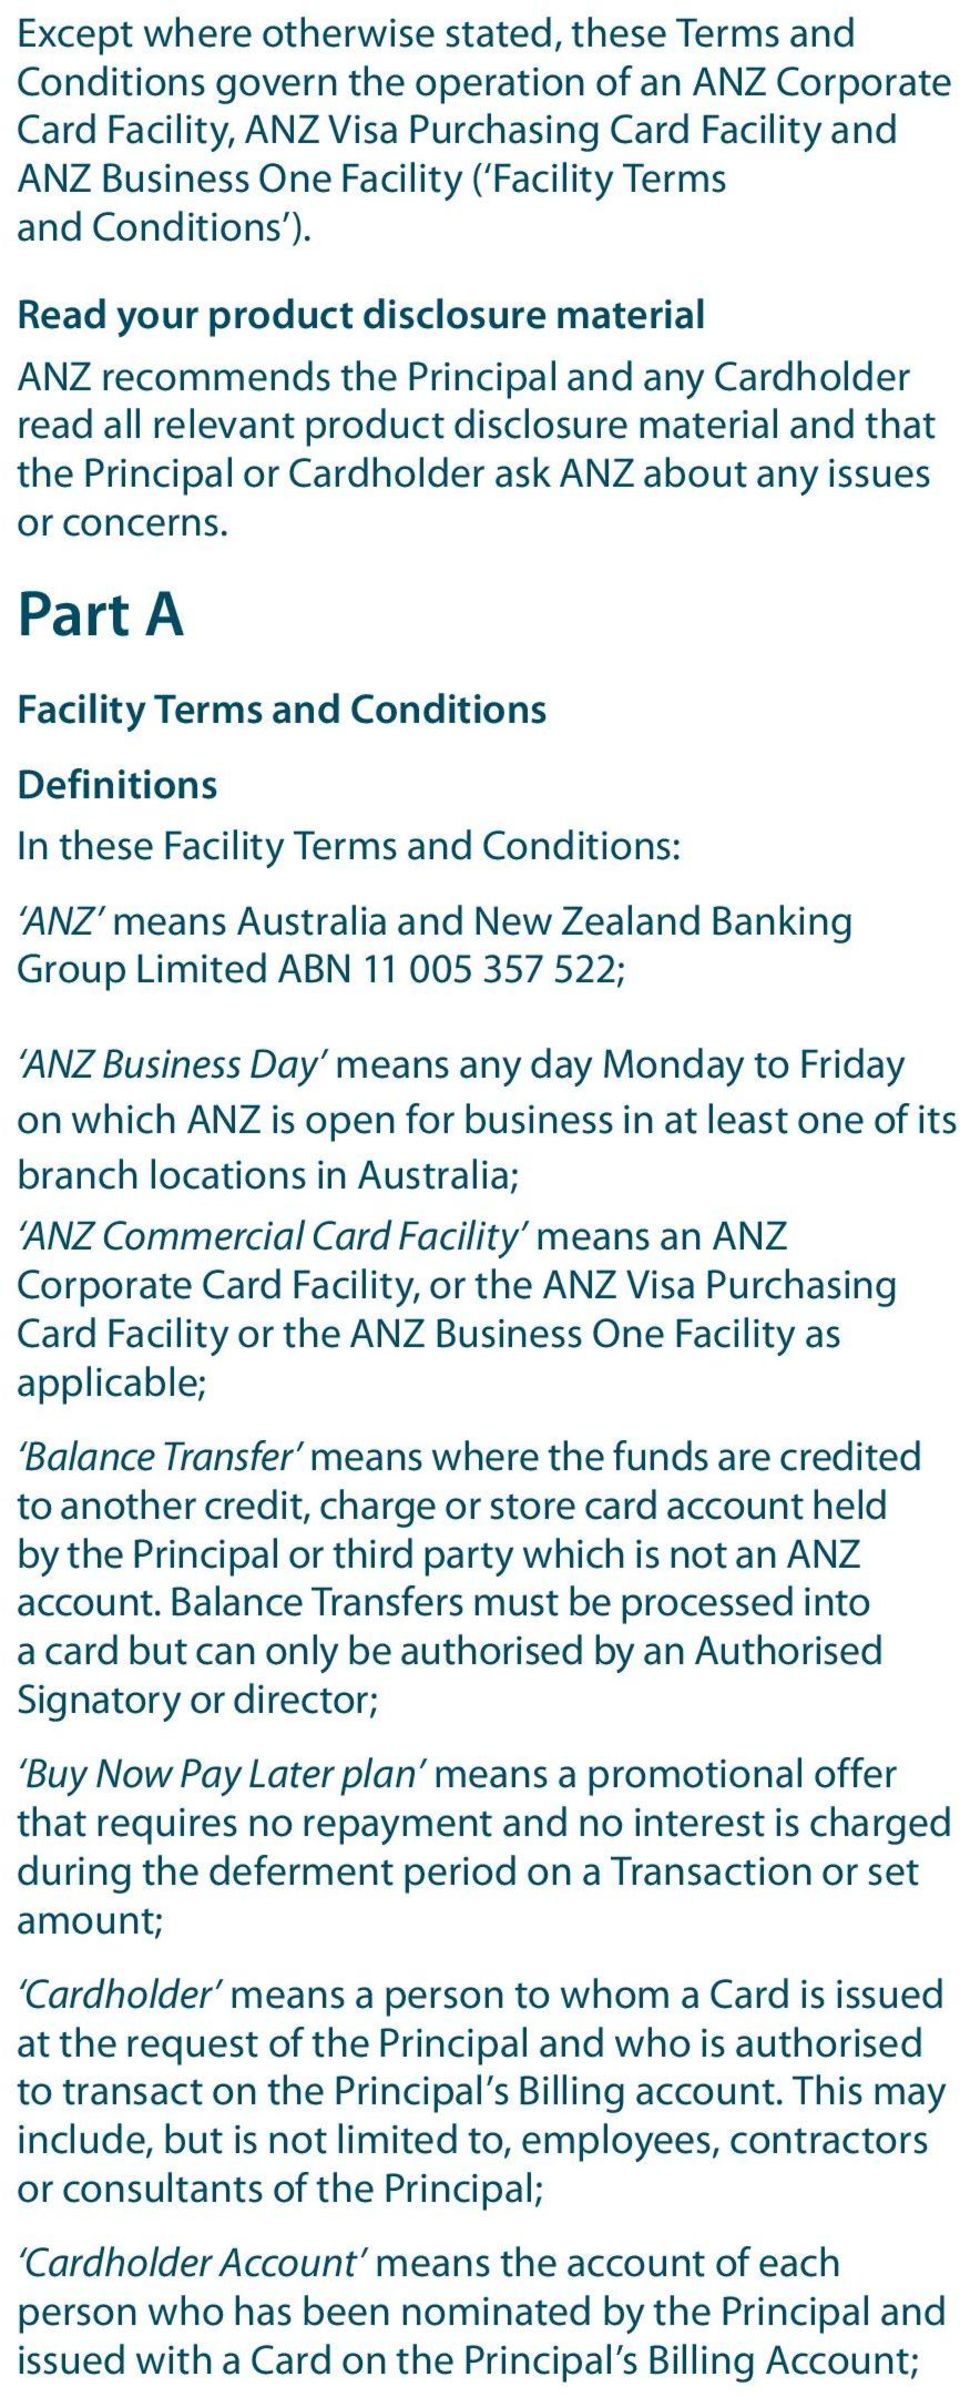 Read your product disclosure material ANZ recommends the Principal and any Cardholder read all relevant product disclosure material and that the Principal or Cardholder ask ANZ about any issues or